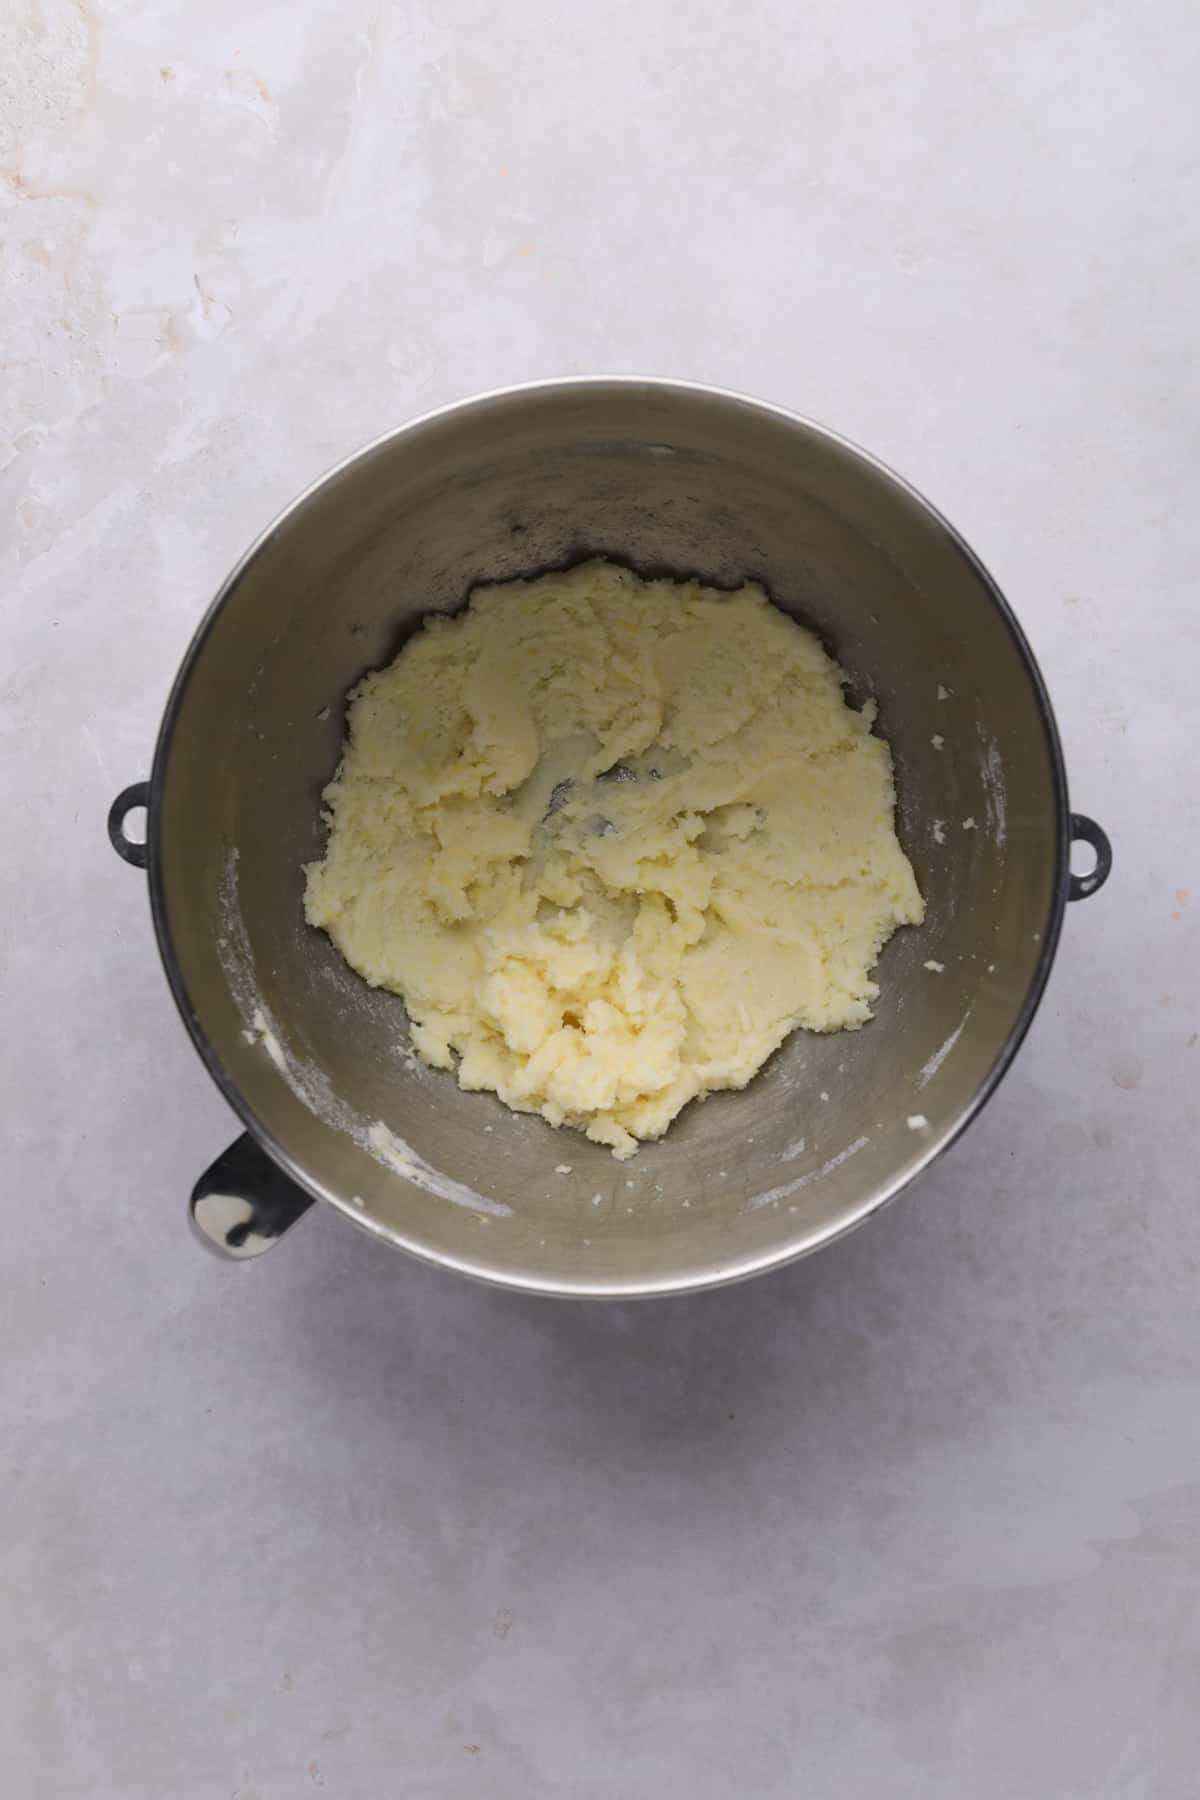 Creamed butter and sugar for lemon cupcakes in a metal stand mixer bowl.